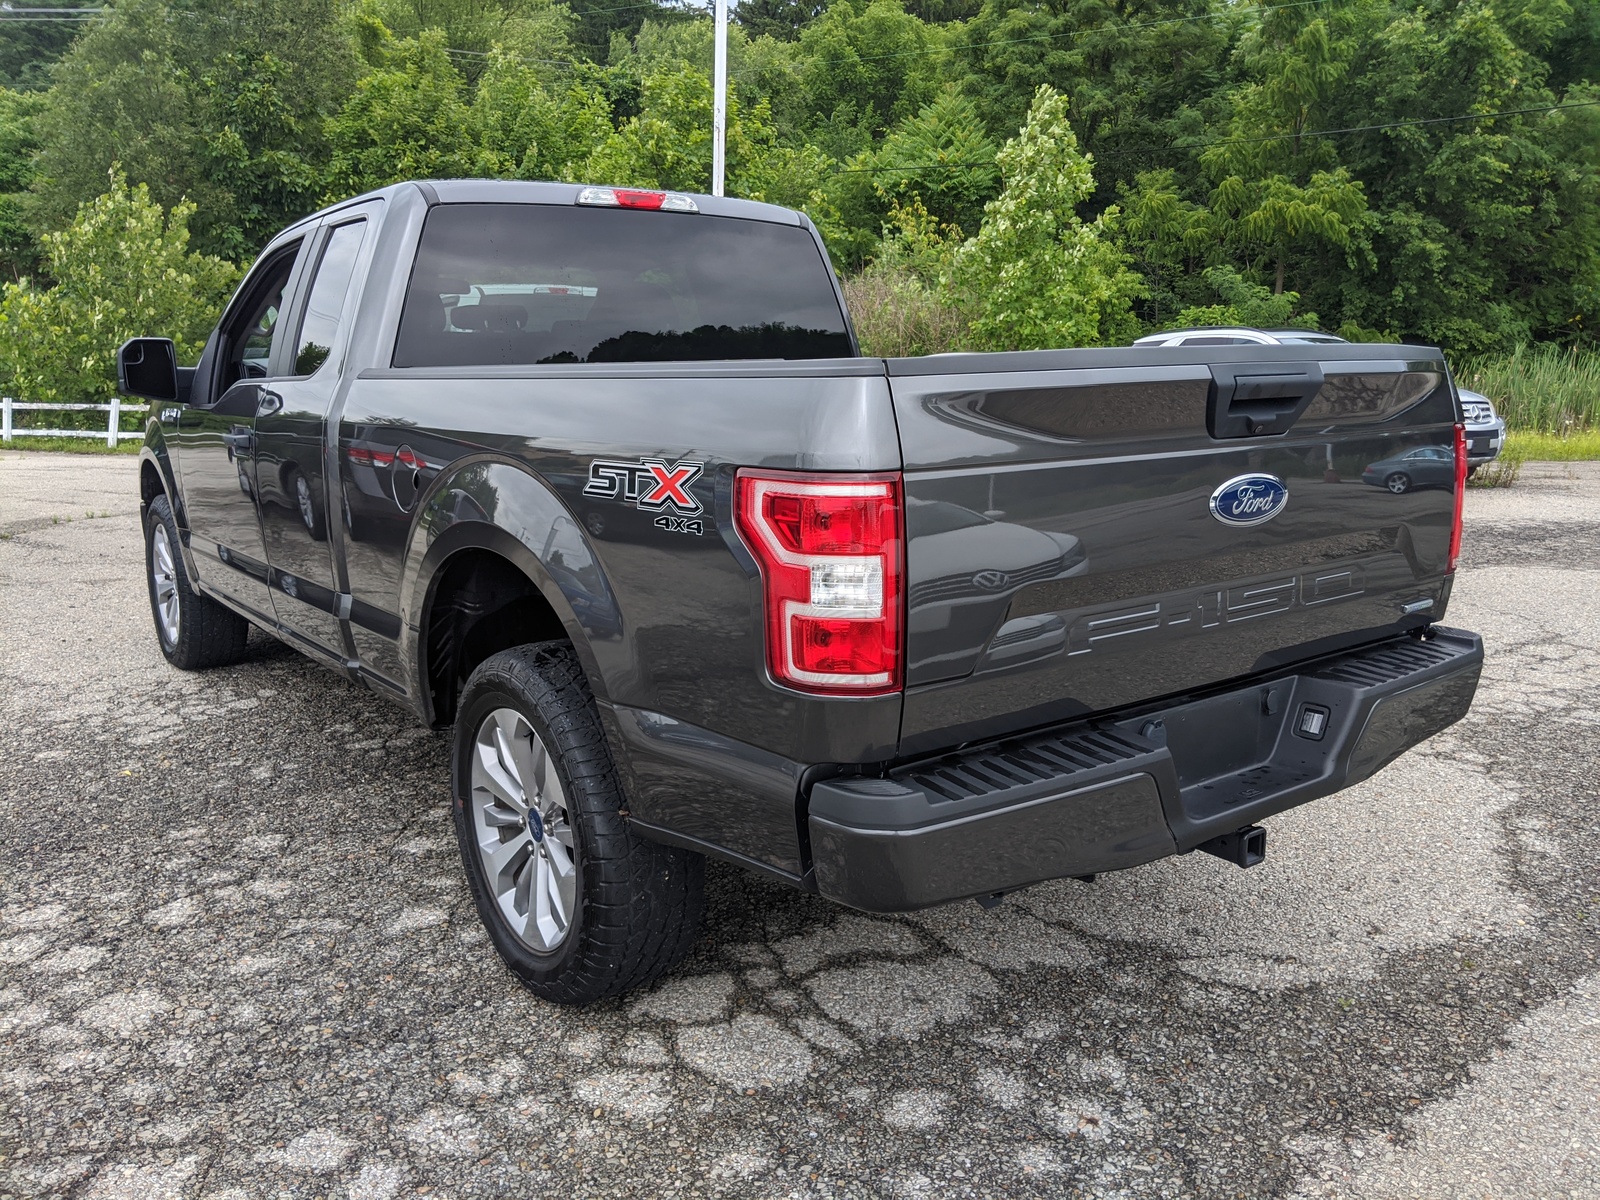 Pre-Owned 2018 Ford F-150 XL in Magnetic Metallic | Greensburg, PA | # ...